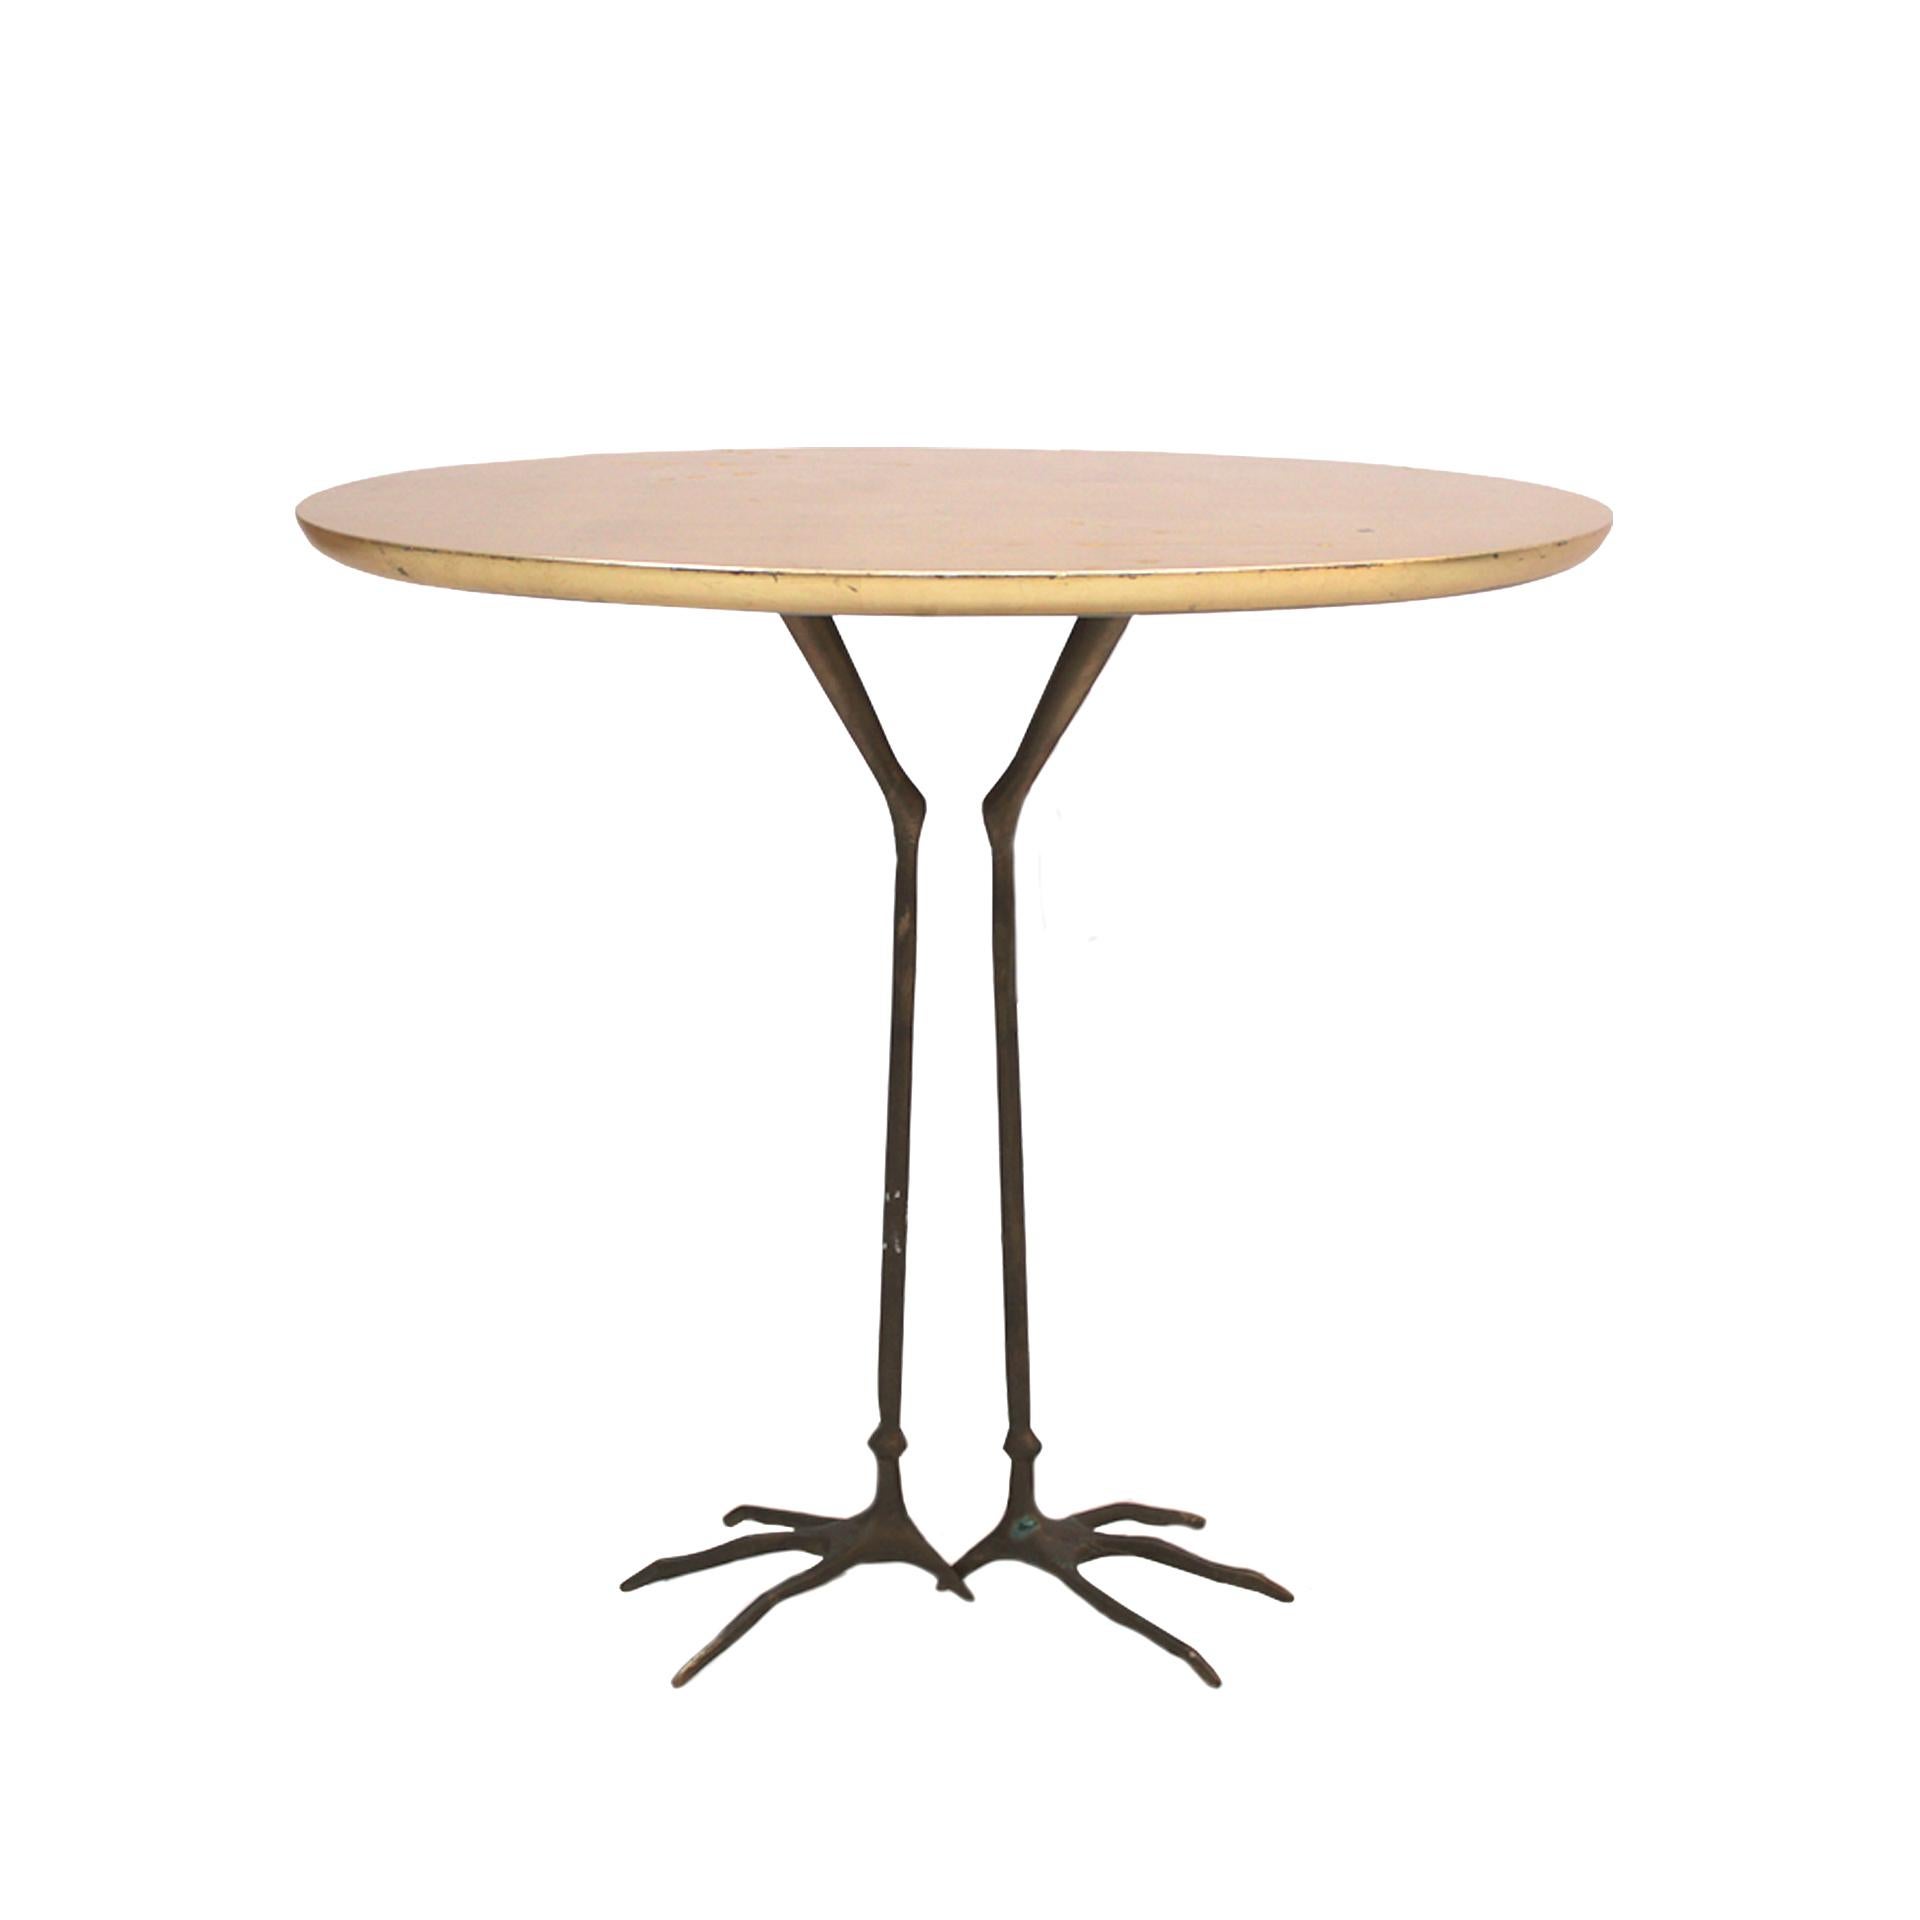 "Traccia" Table Designed by Meret Oppenheim in 1936 and Edited by Gavina